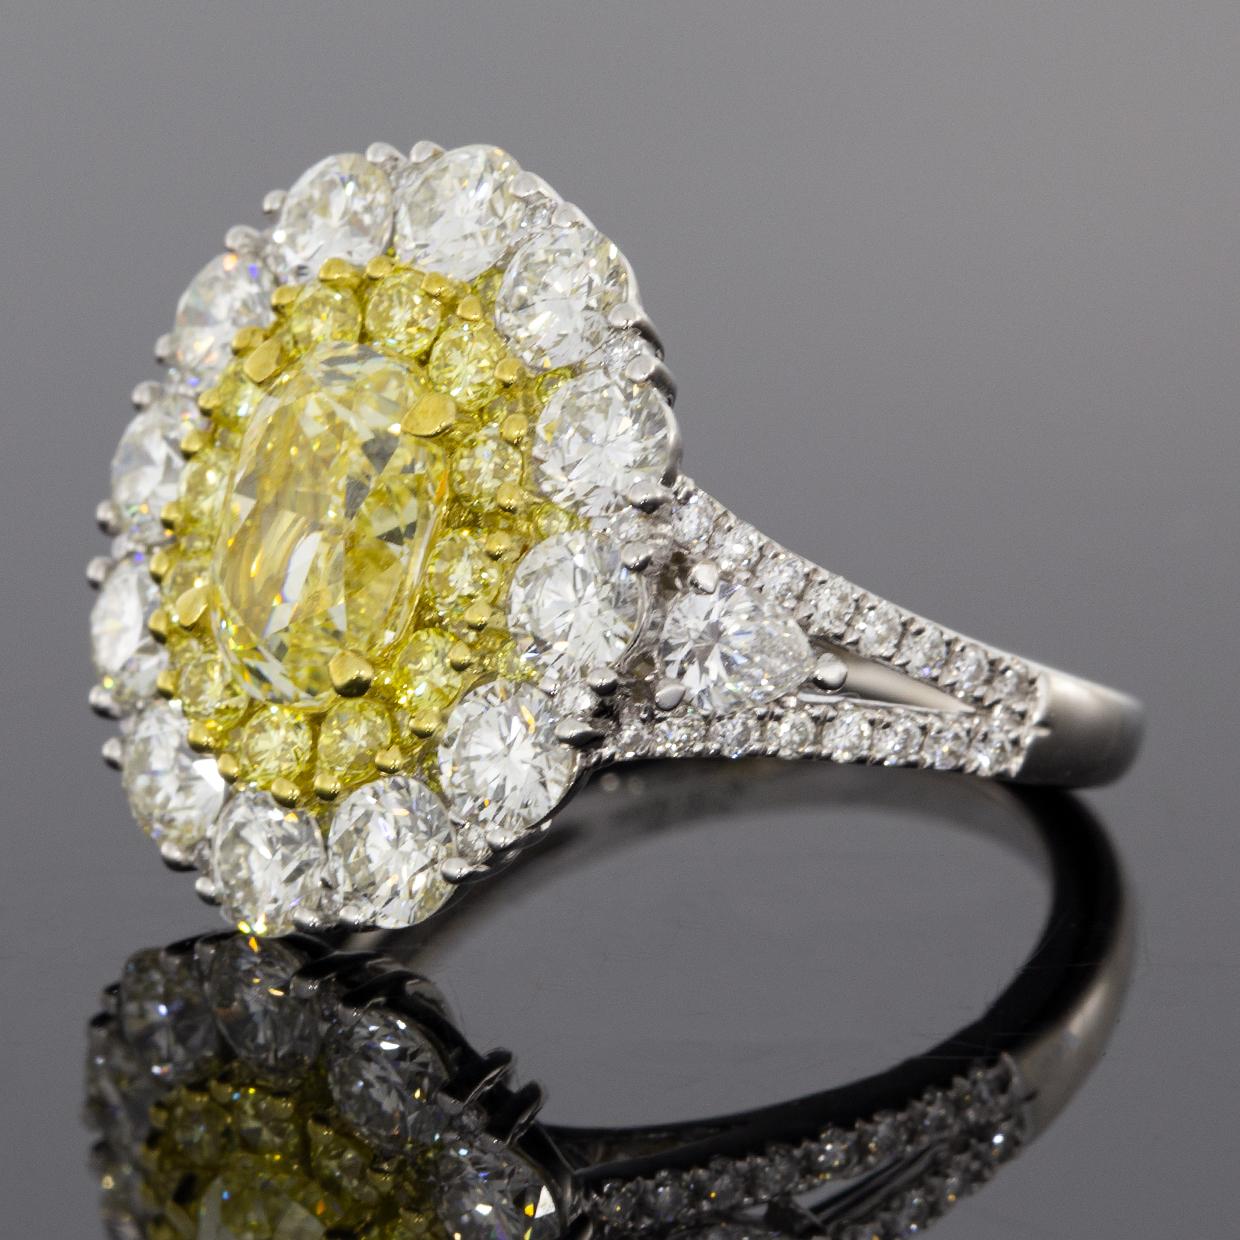 Oval Cut 4.64 Carat GIA Certified Fancy Light Yellow Oval Diamond Halo Engagement Ring